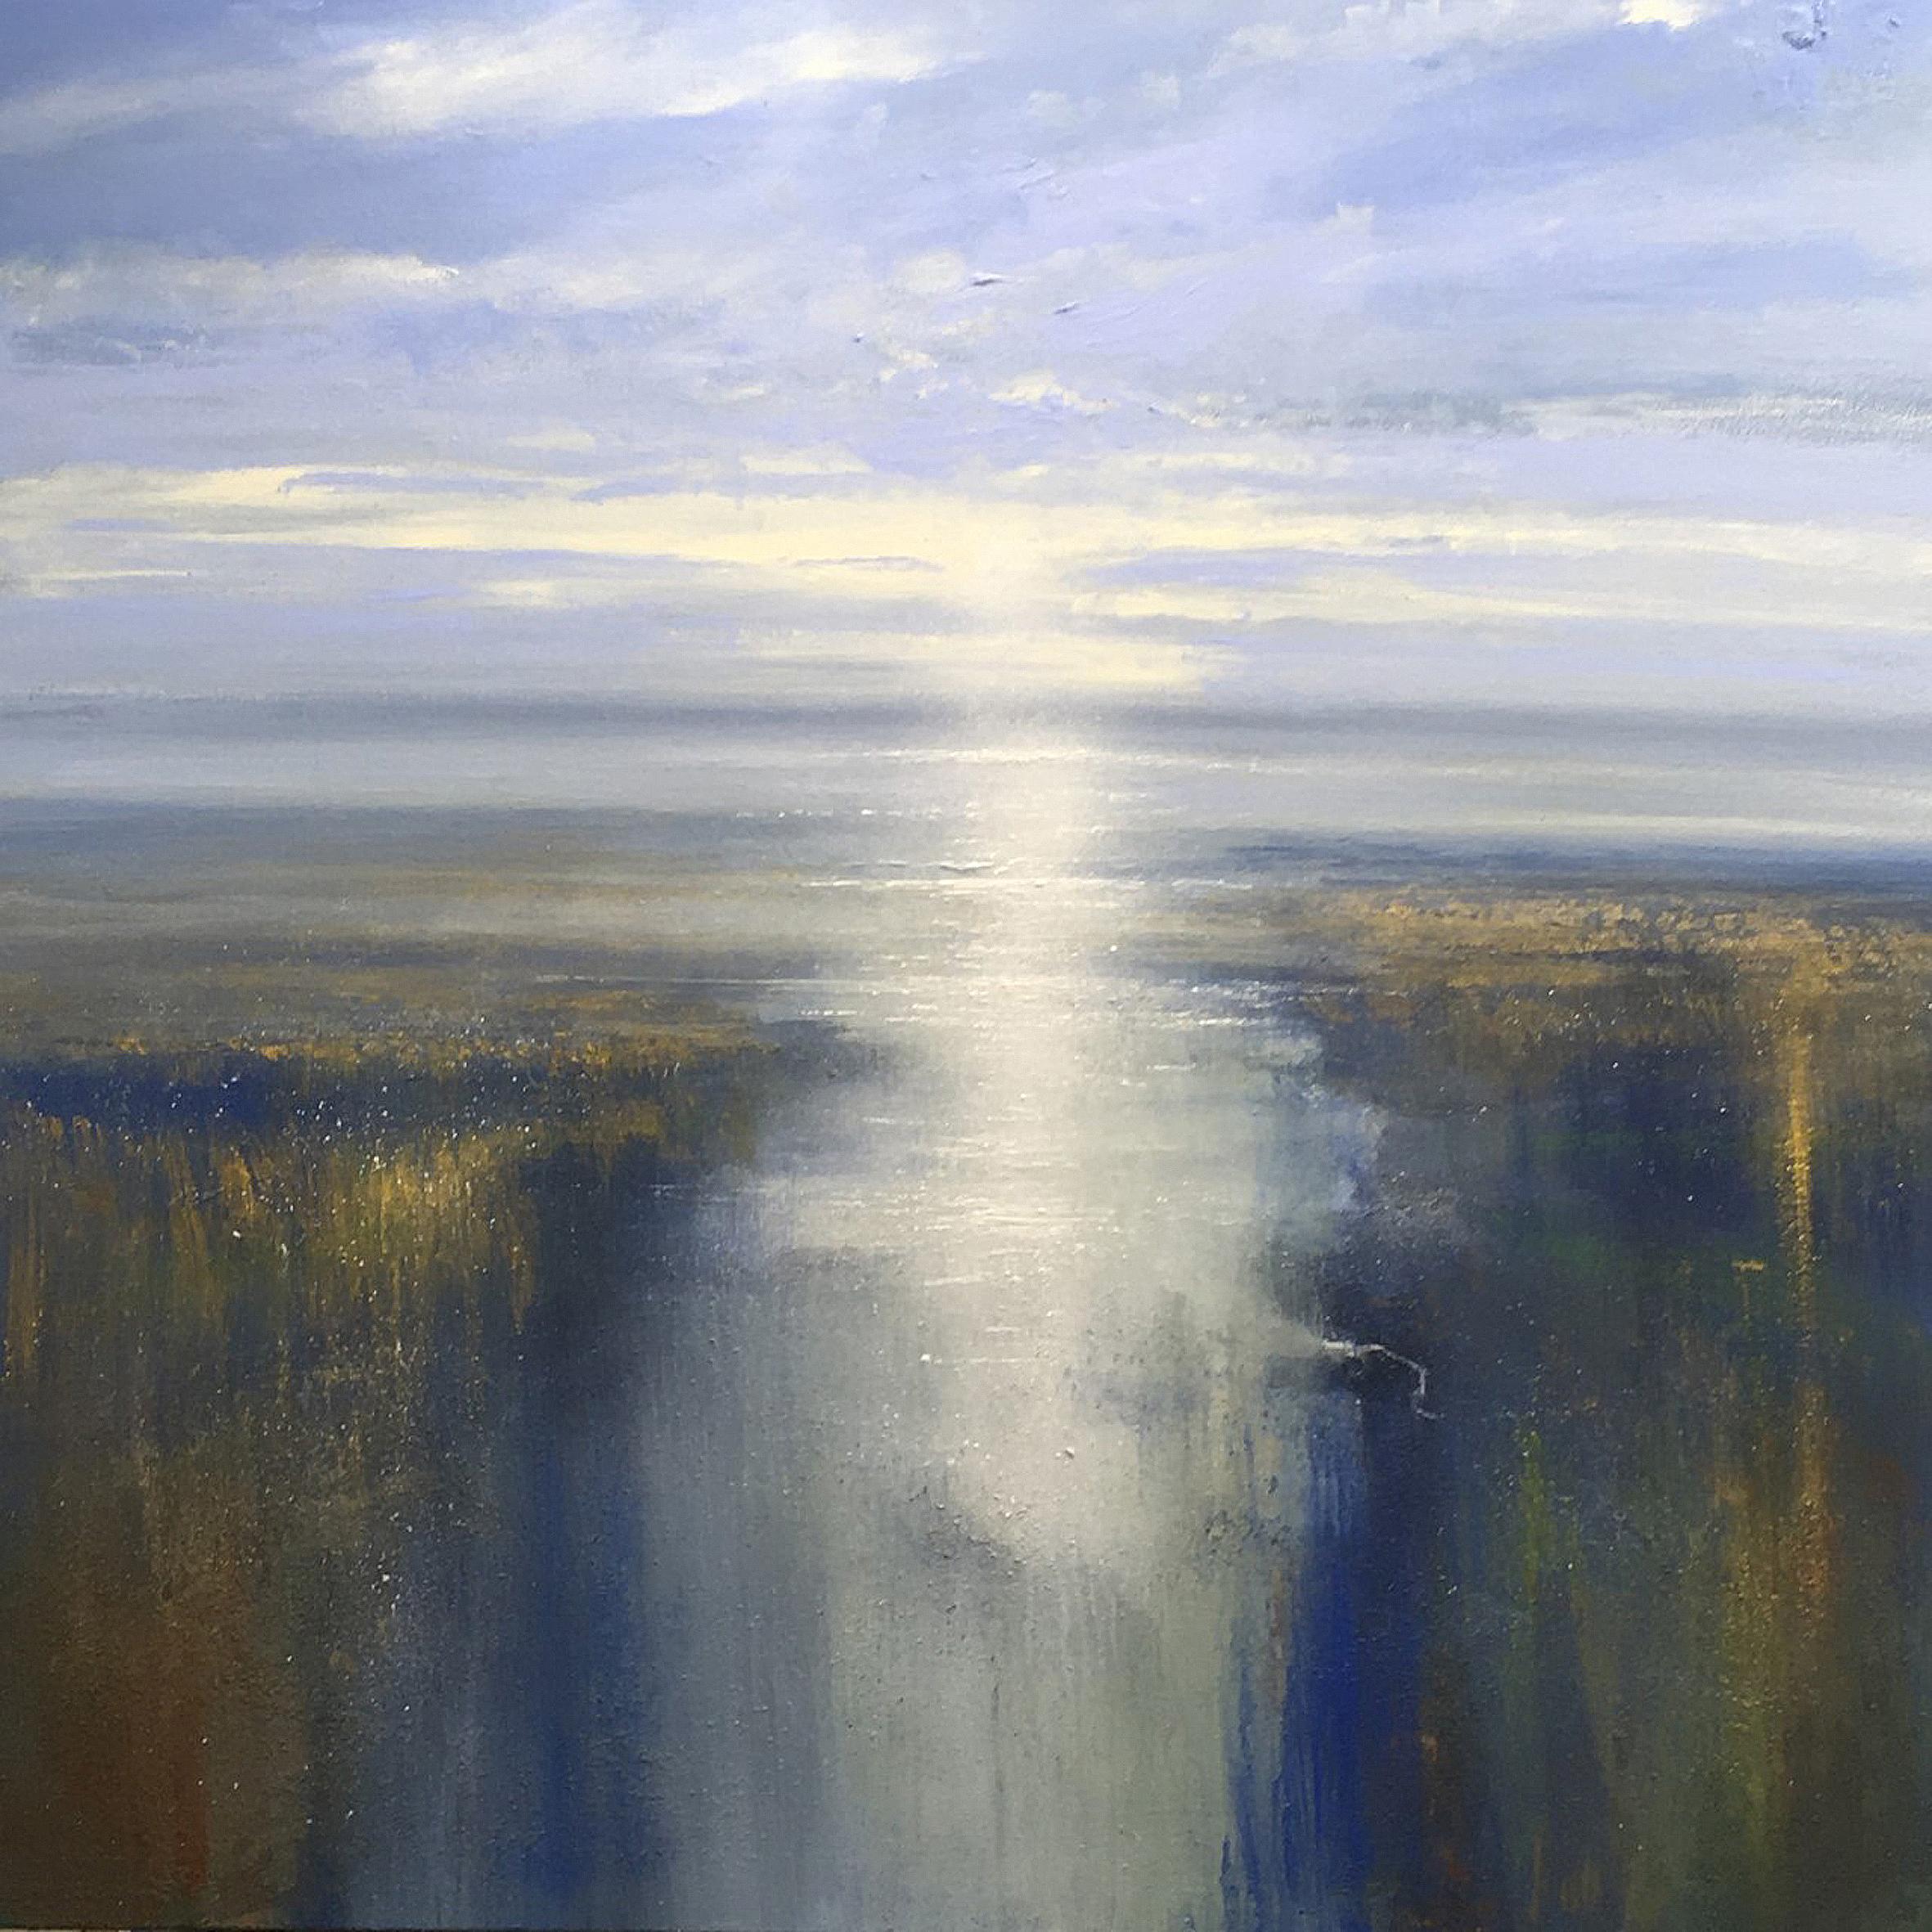 First Light on the Estuary - landscape oil painting modern realist realism Art